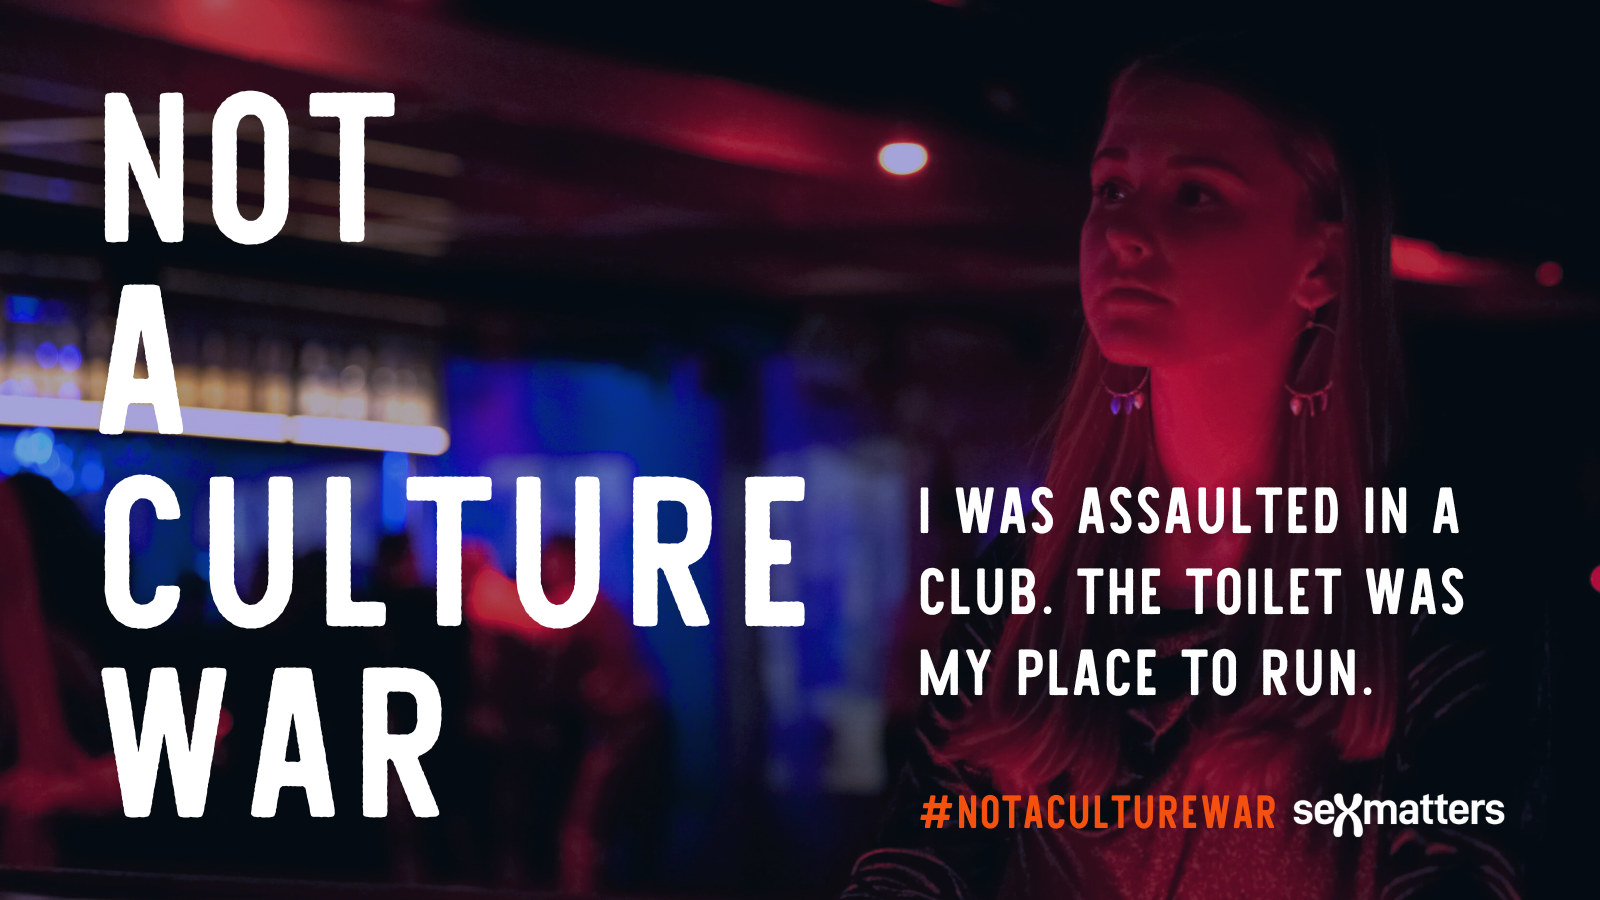 I was assaulted in a club. The toilet was my place to run.